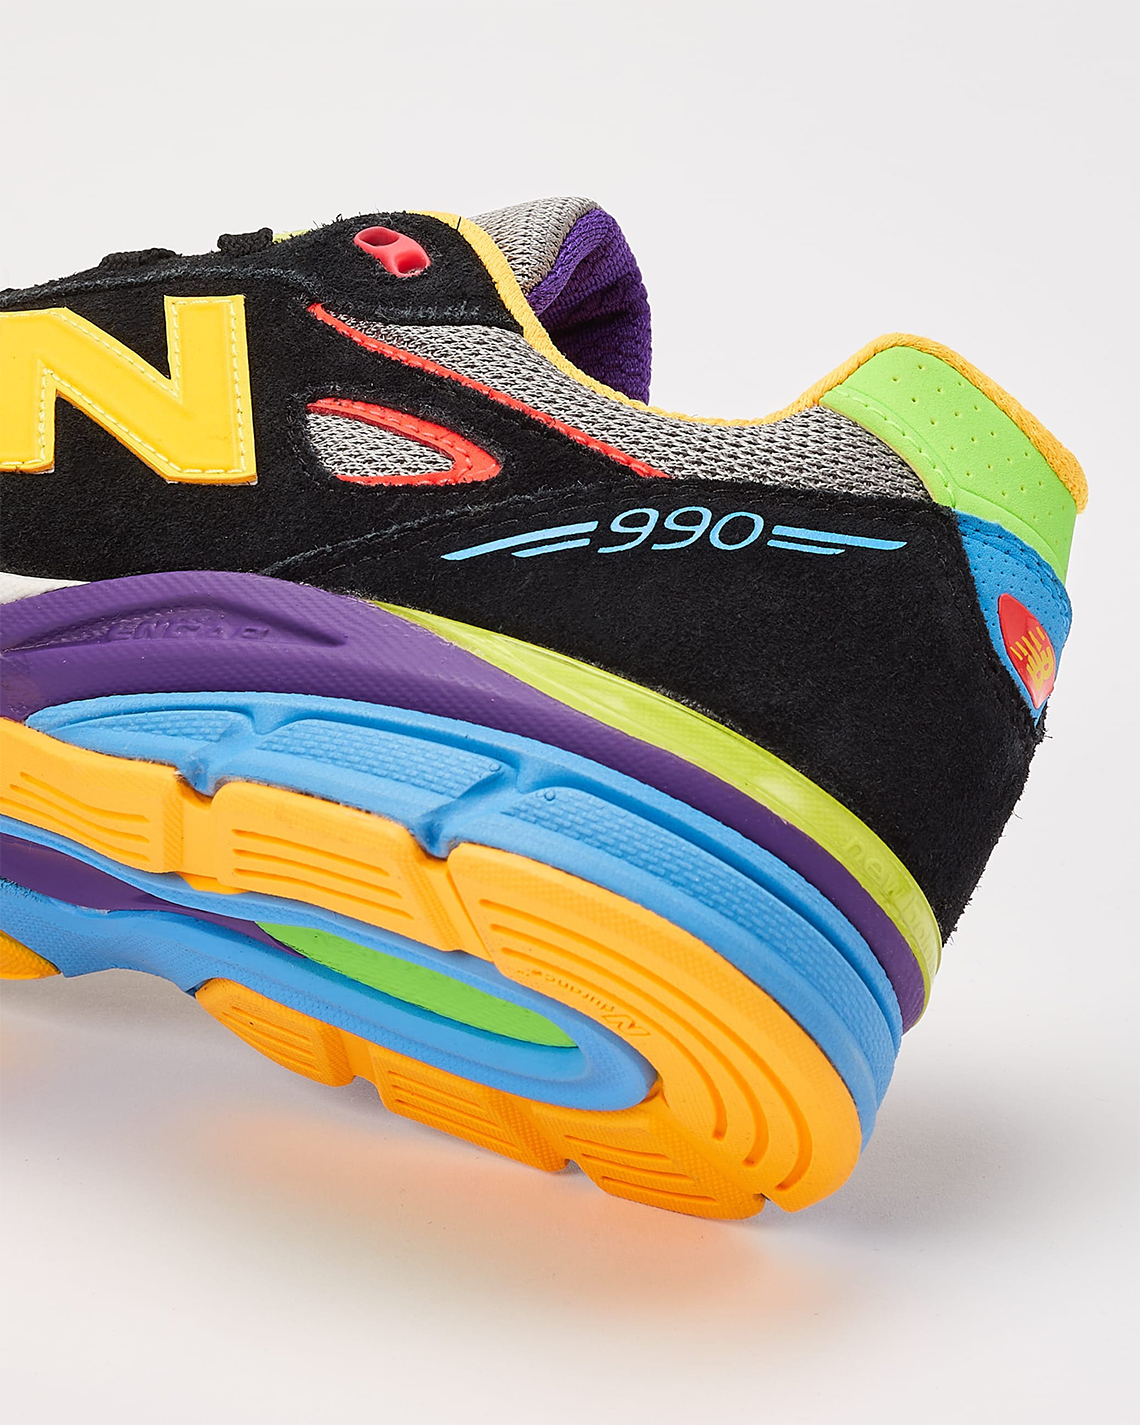 Dtlr New Balance 990v4 Wild Style 2 Release Date 1